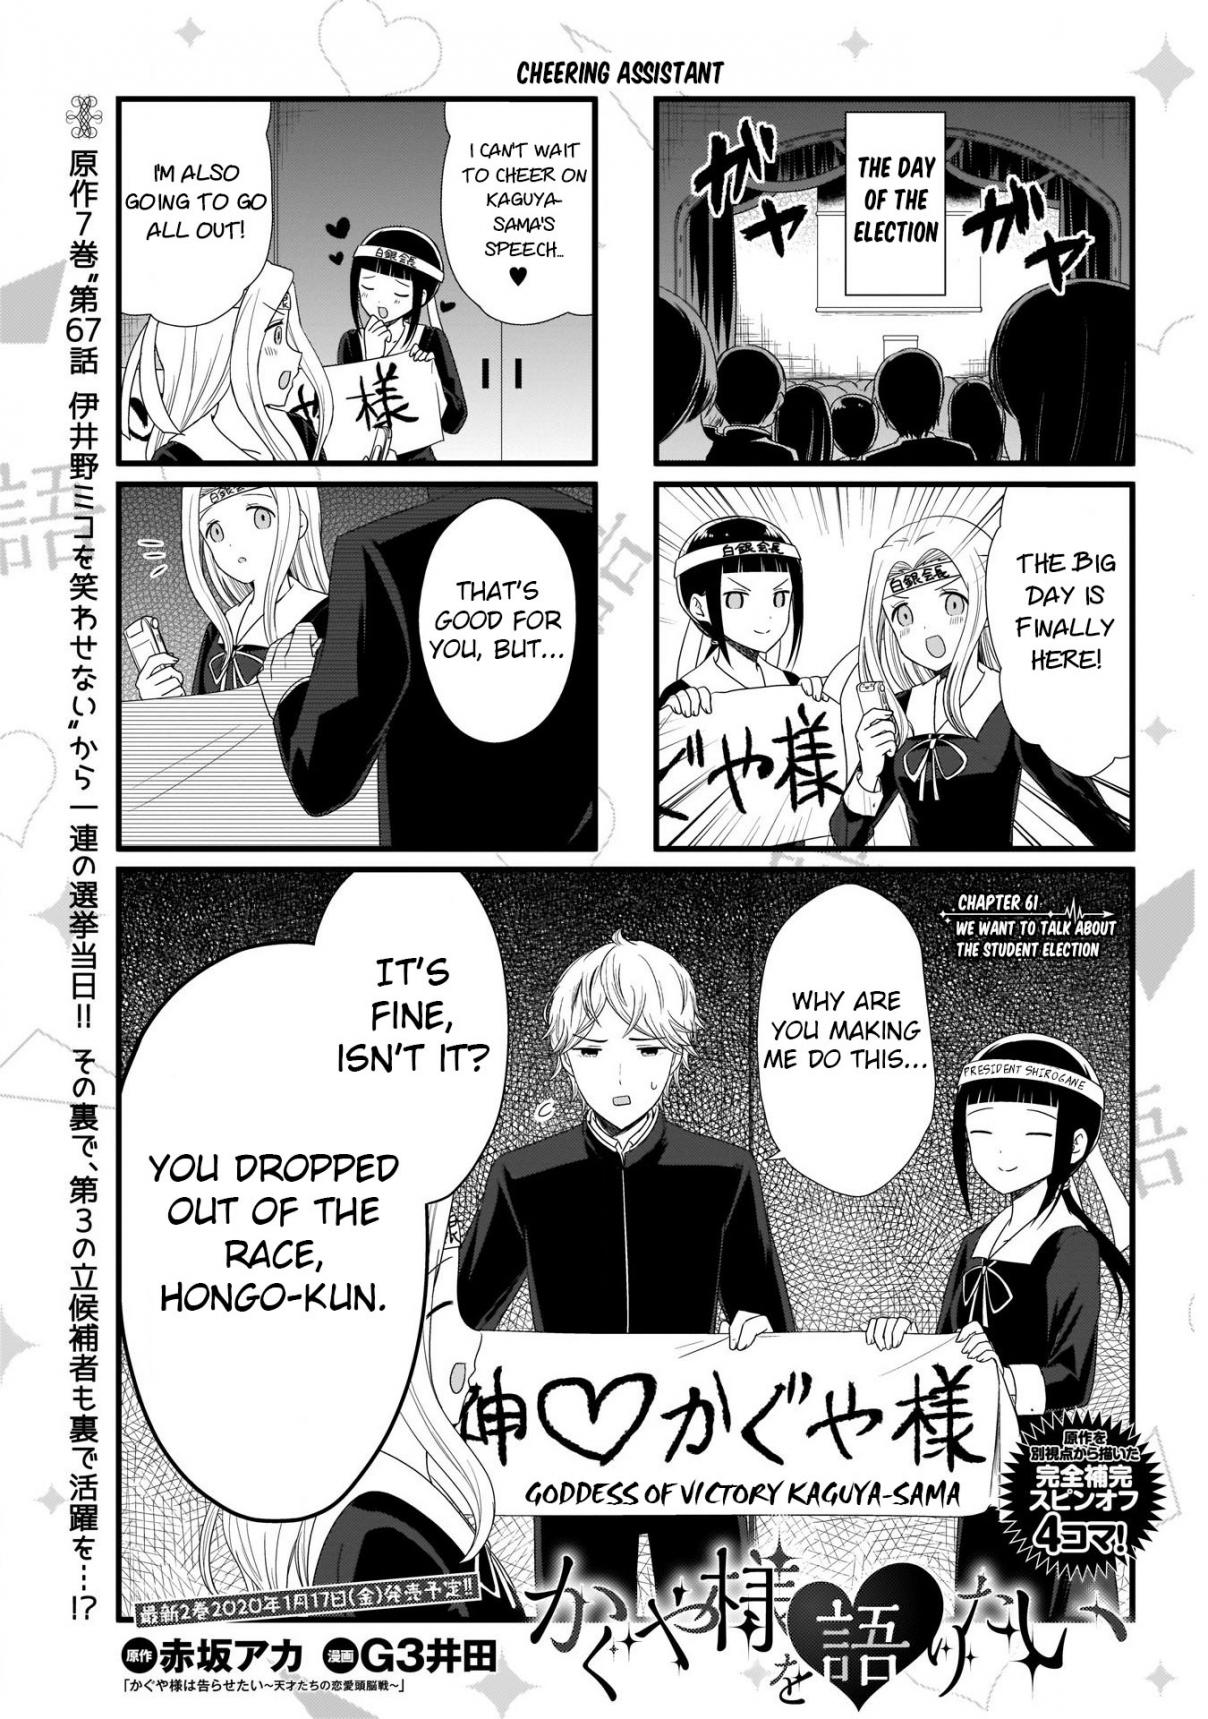 We Want To Talk About Kaguya Ch. 61 We Want to Talk About the Student Election